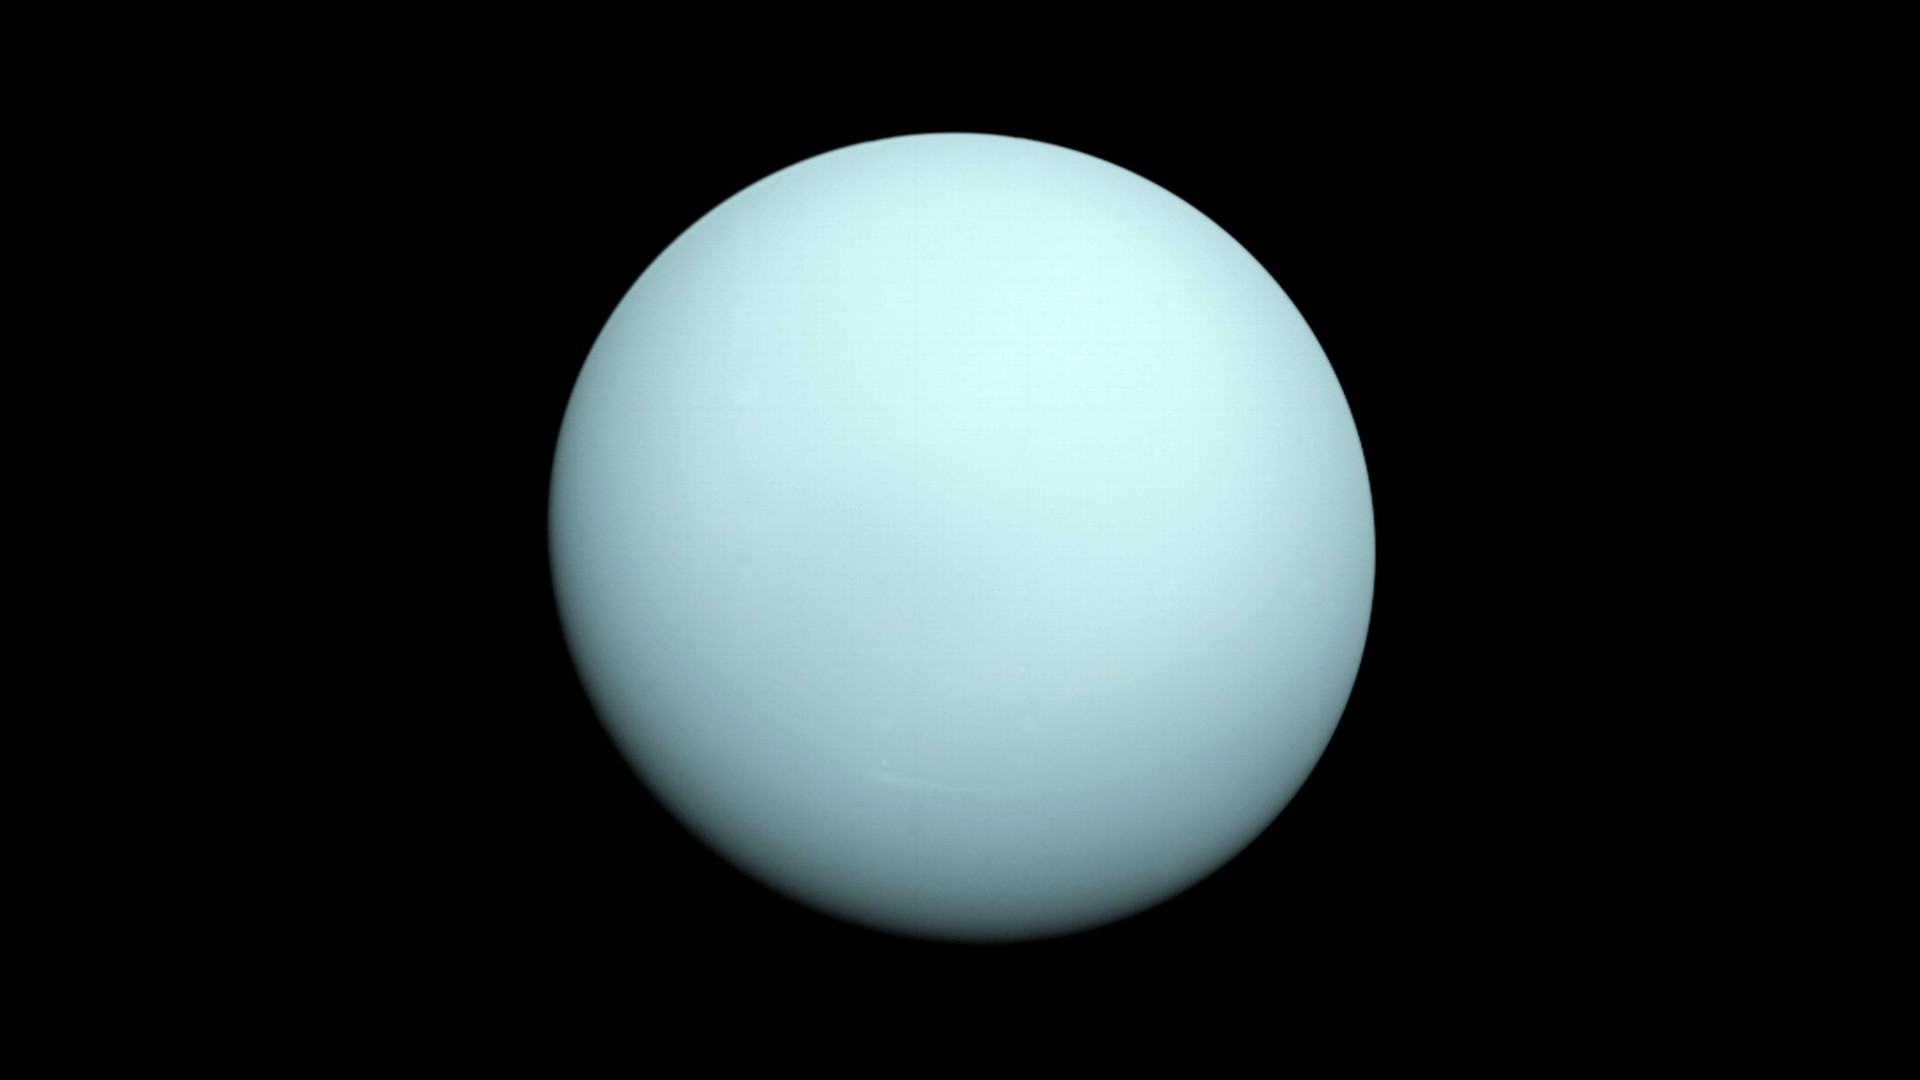 Uranus: Facts about the sideways ice giant | Live Science